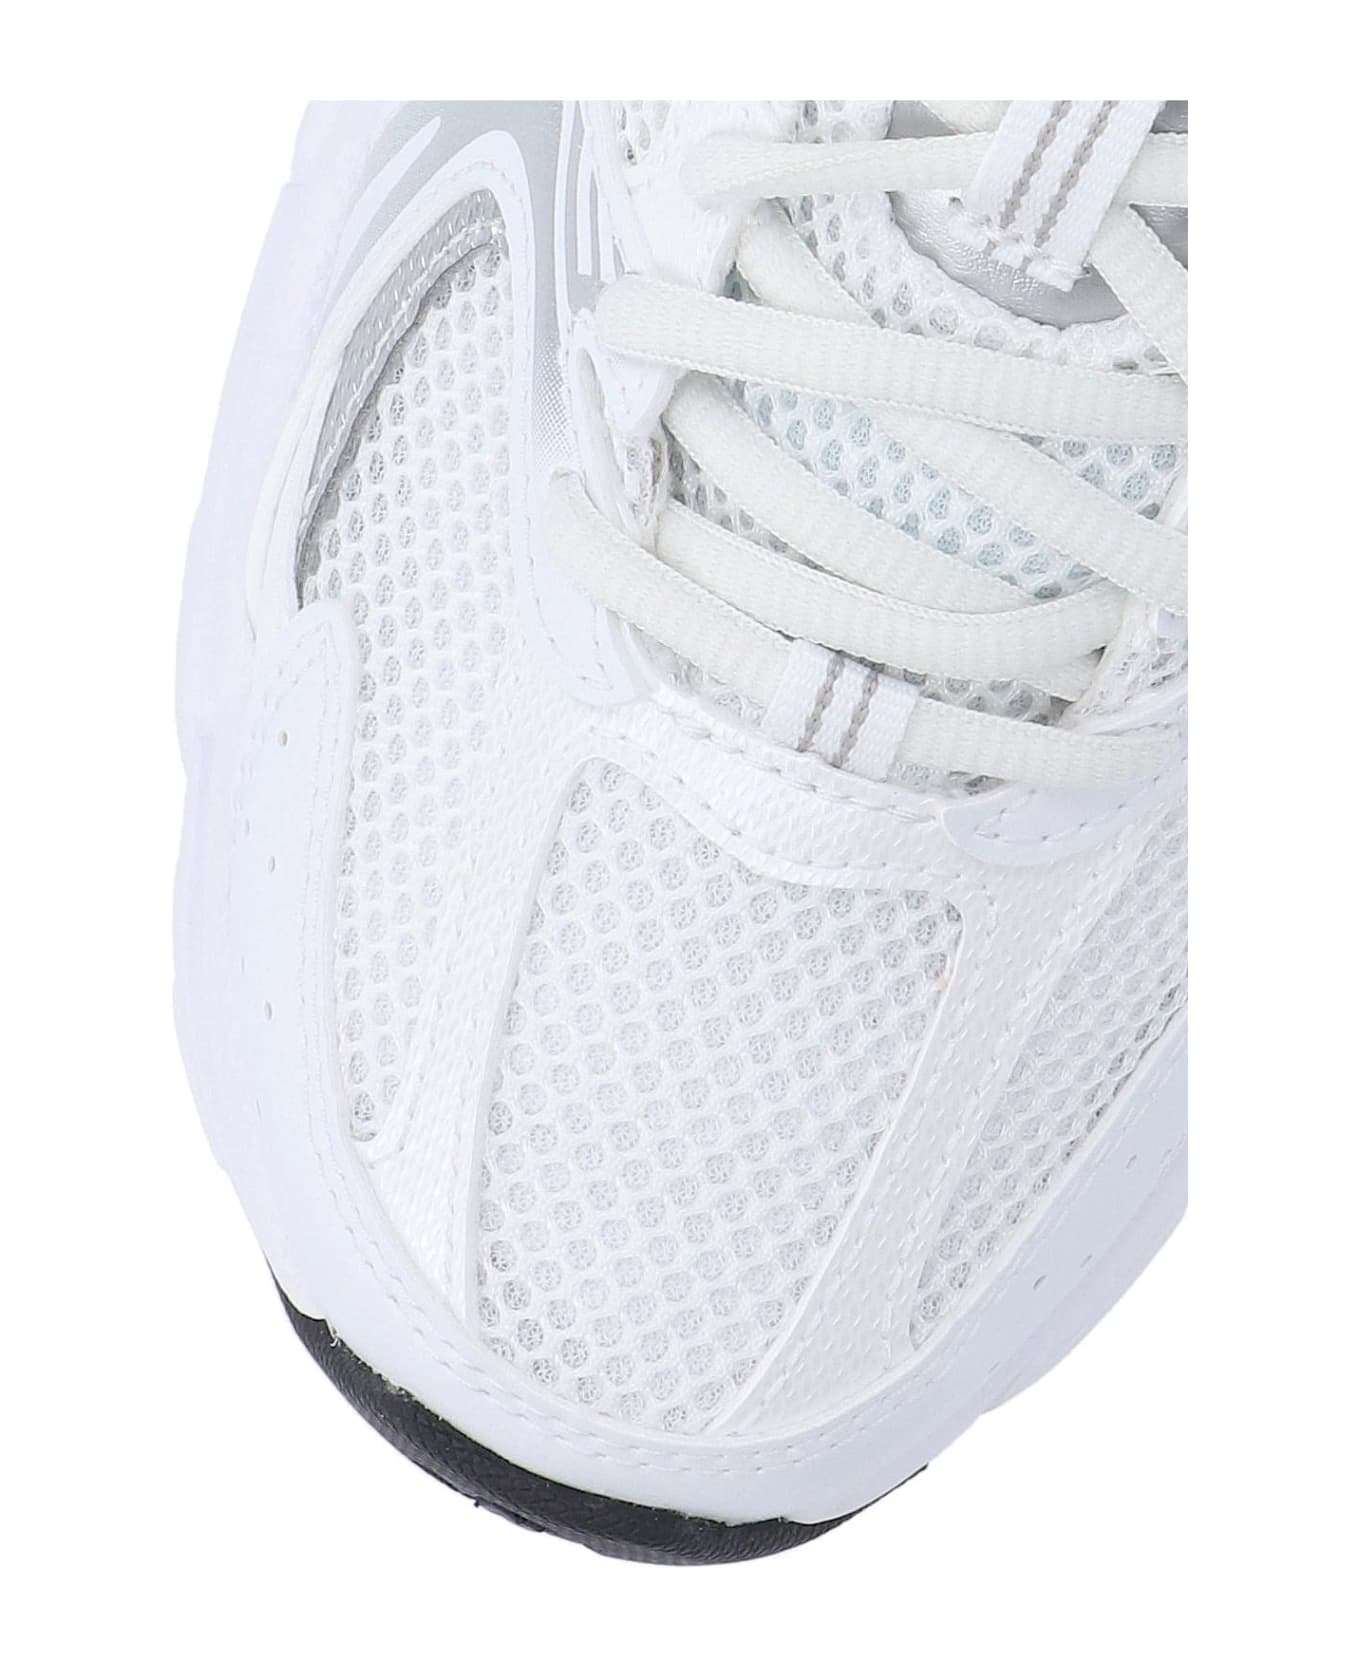 New Balance '530' Sneakers - WHITE